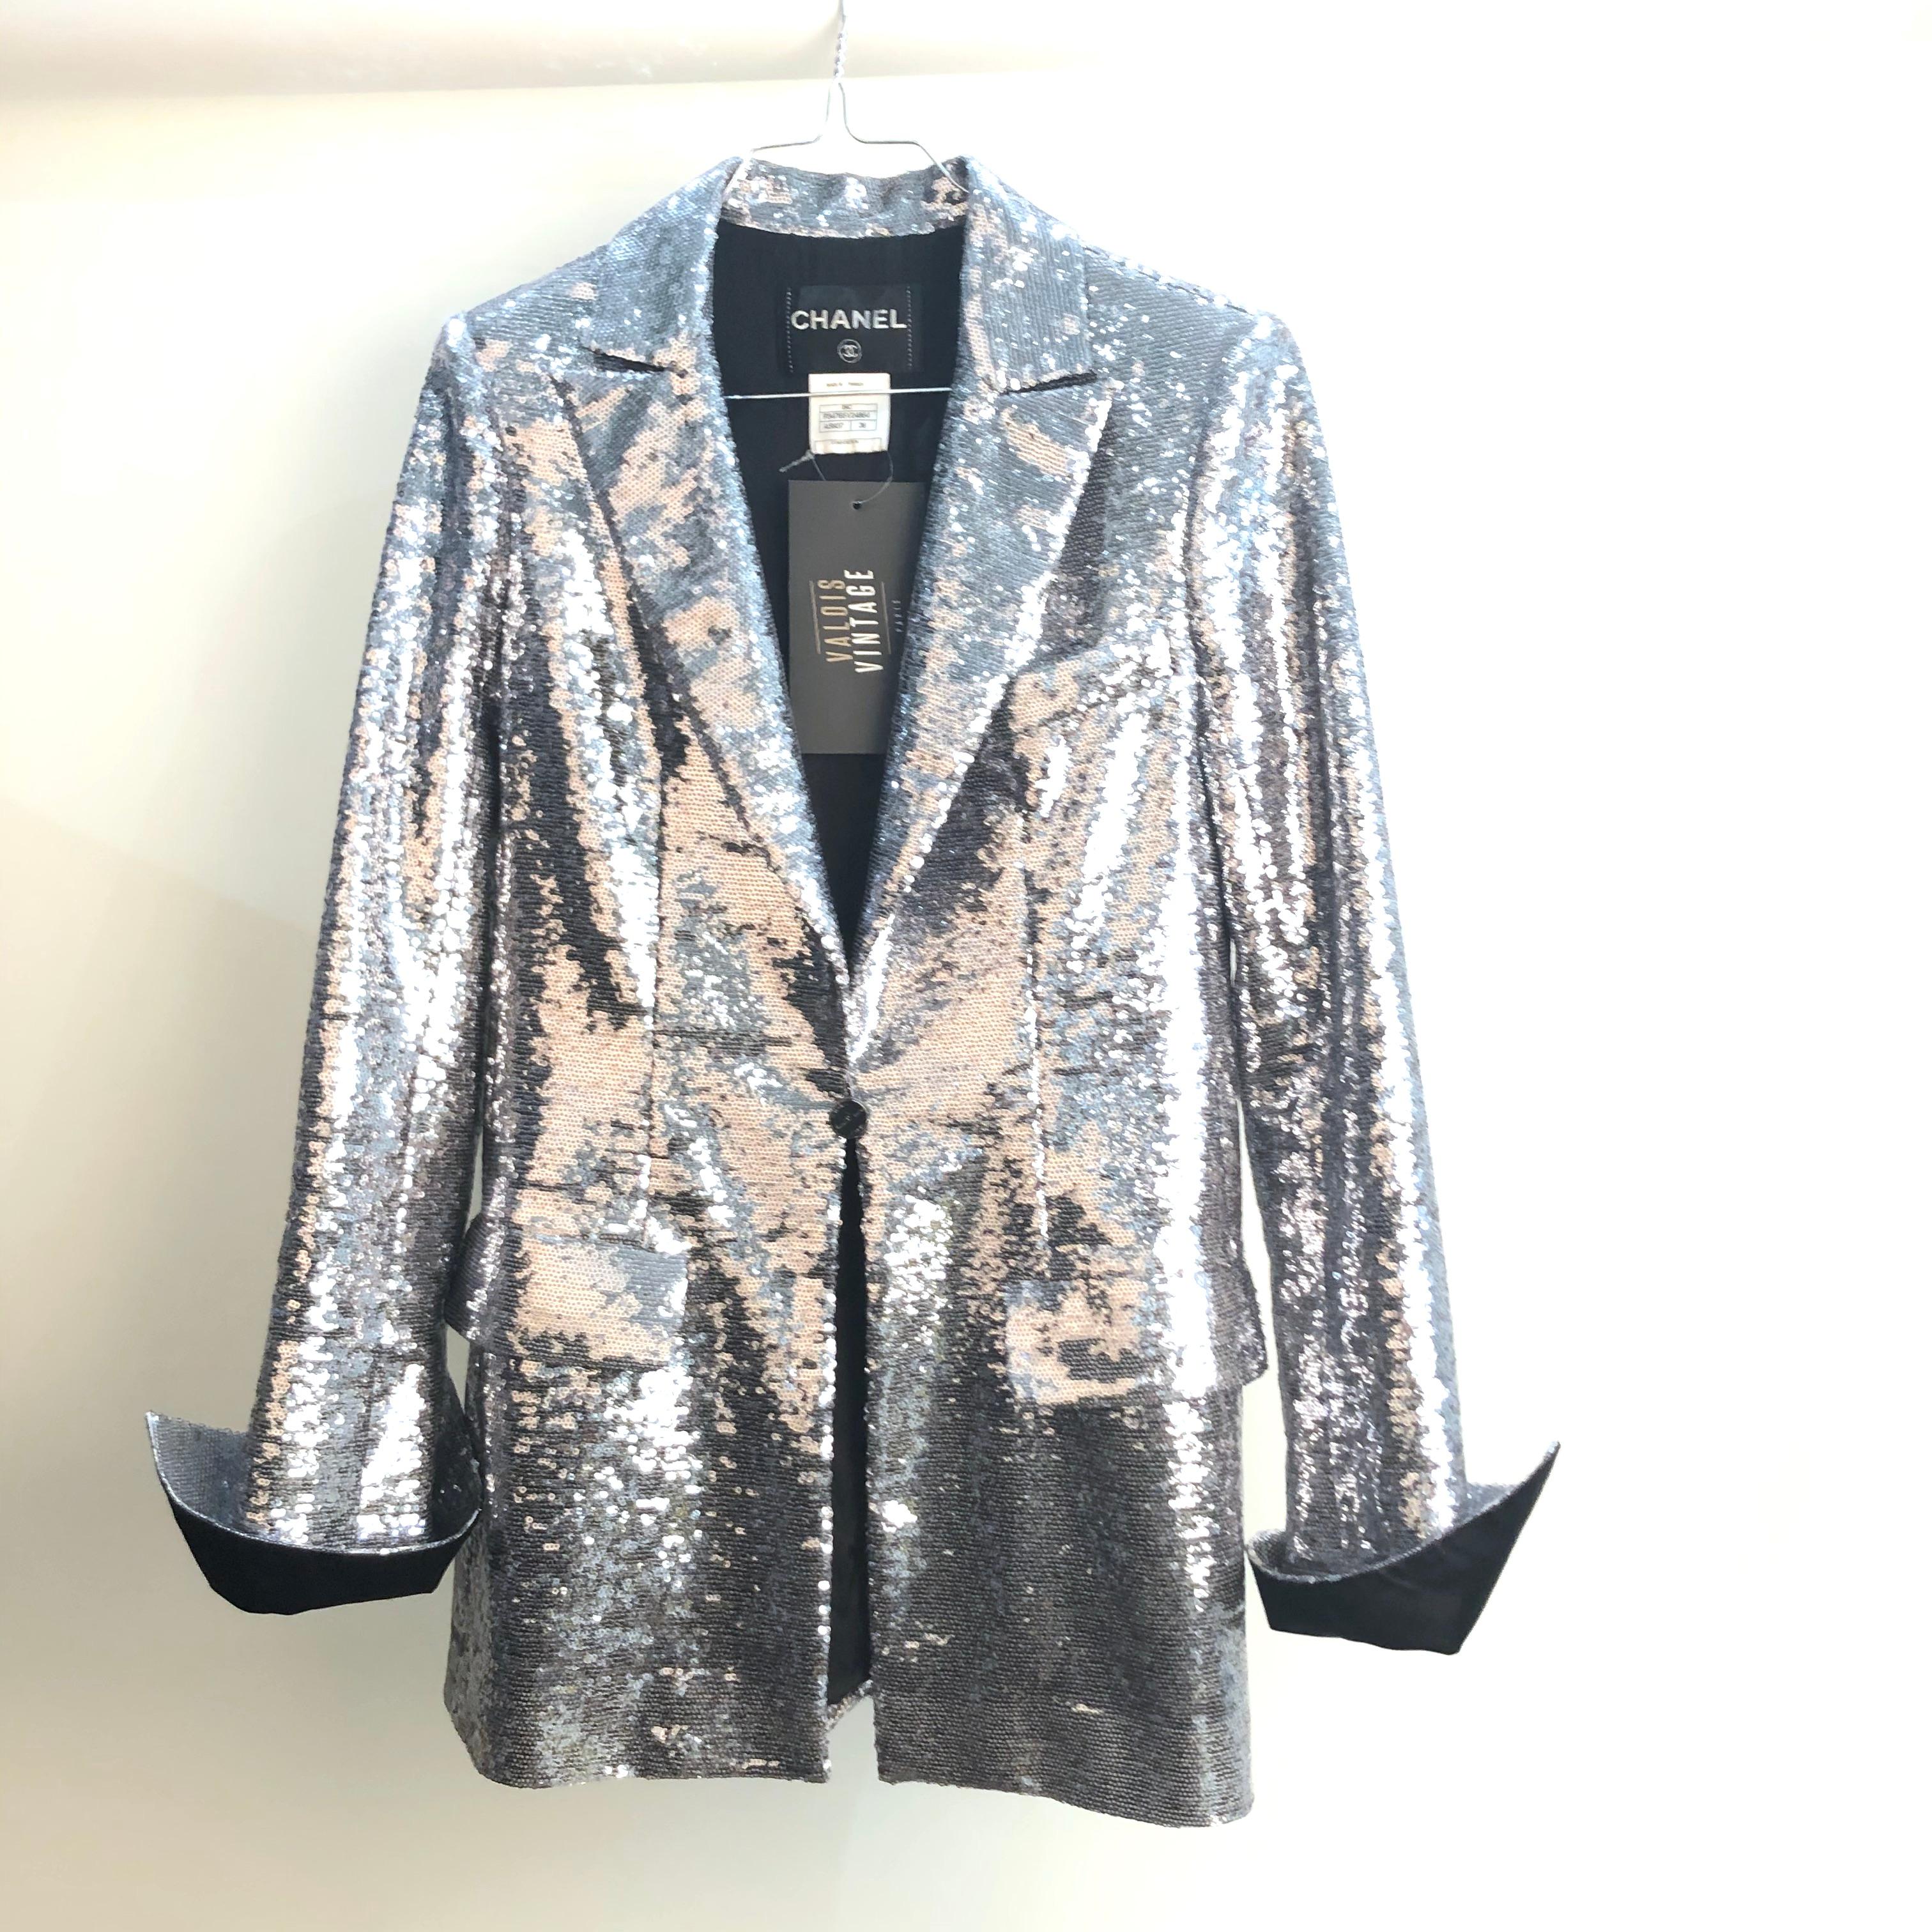 Very beautiful CHANEL piece from the Paris-Miami Cruise Collection in 2009. Blazer entirely embroidered with silver sequins, lined with black silk camellia monogram. With two flat pockets and a slit pocket on the chest, it closes with a single